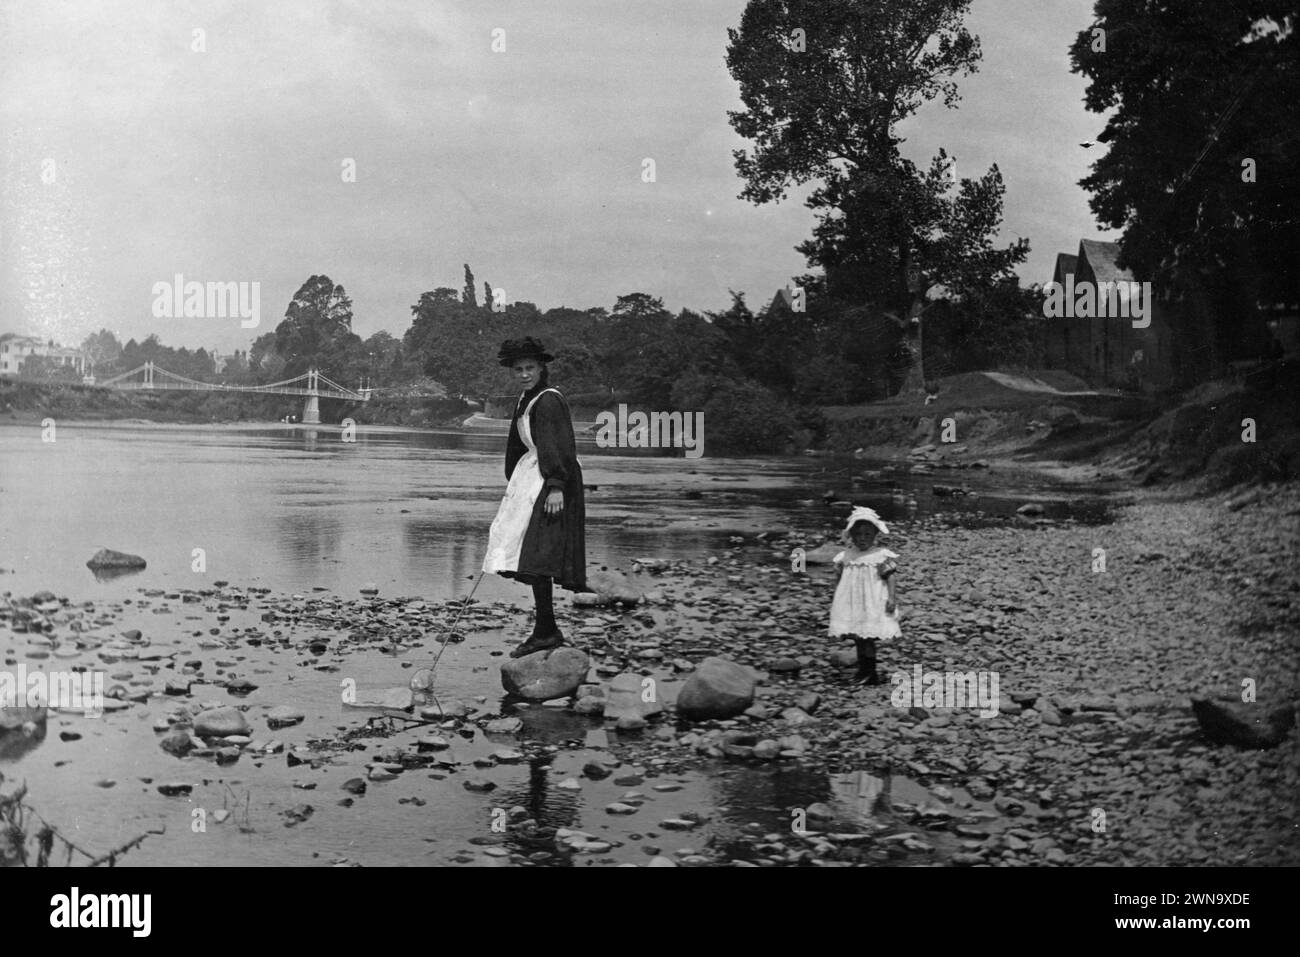 1897 Historic Black and White Photograph of a Nanny and Child by the River Wye with Victoria Bridge, Hereford, Herefordshire, England, UK Stock Photo